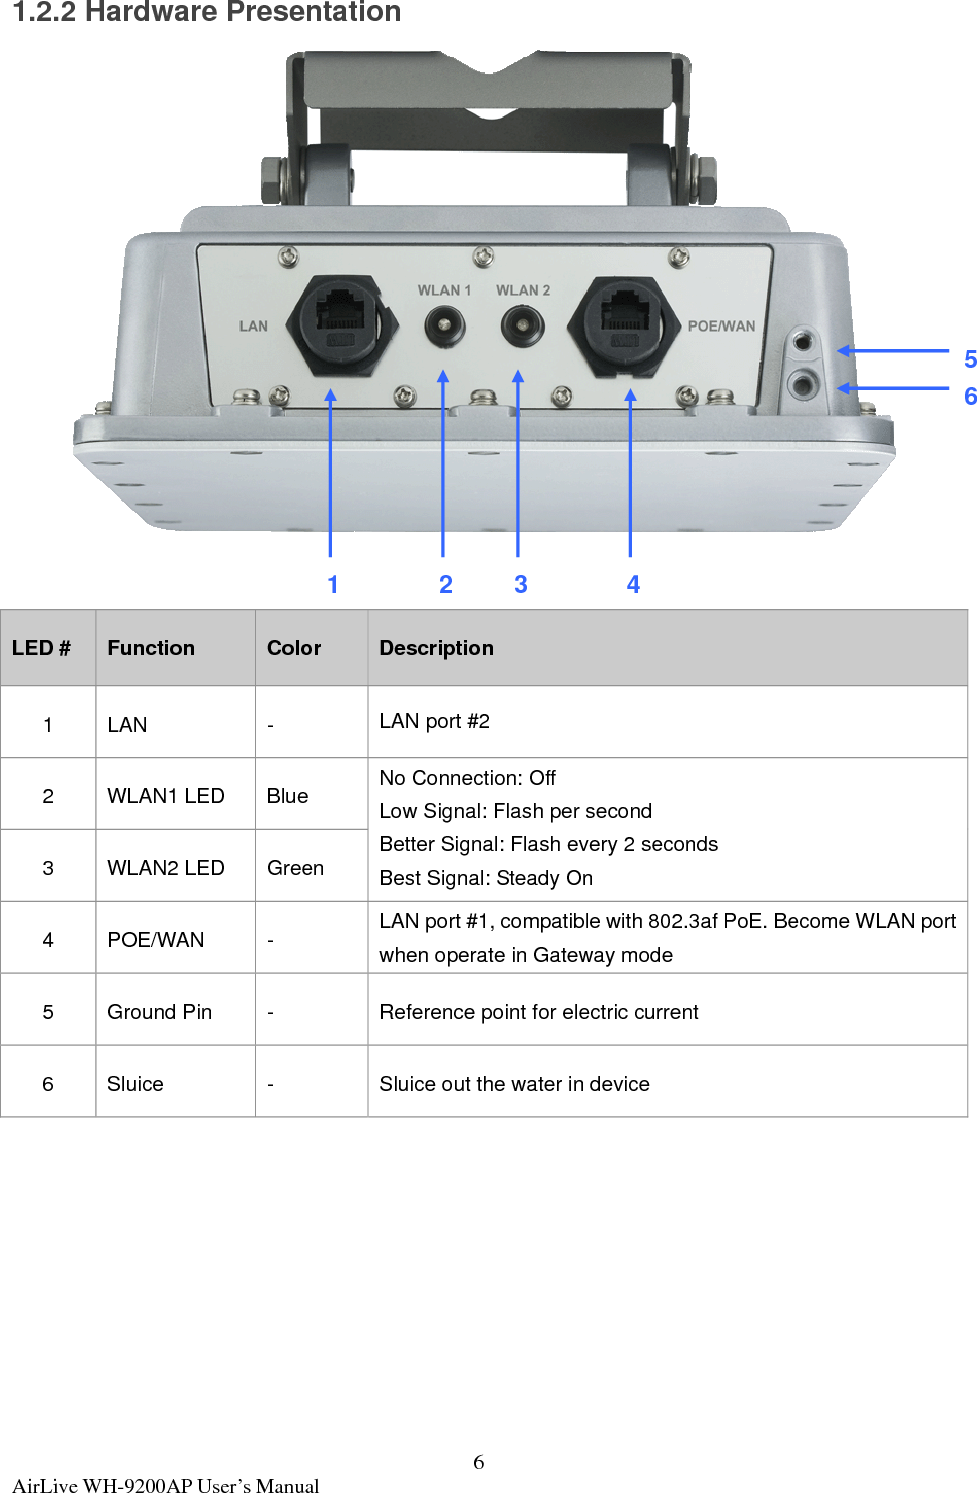  AirLive WH-9200AP User’s Manual  61.2.2 Hardware Presentation    LED #  Function  Color  Description 1 LAN  -  LAN port #2 2 WLAN1 LED Blue  No Connection: Off Low Signal: Flash per second Better Signal: Flash every 2 seconds Best Signal: Steady On 3 WLAN2 LED Green 4 POE/WAN  -  LAN port #1, compatible with 802.3af PoE. Become WLAN port when operate in Gateway mode 5  Ground Pin  -  Reference point for electric current 6  Sluice  -  Sluice out the water in device      1 2 3 456